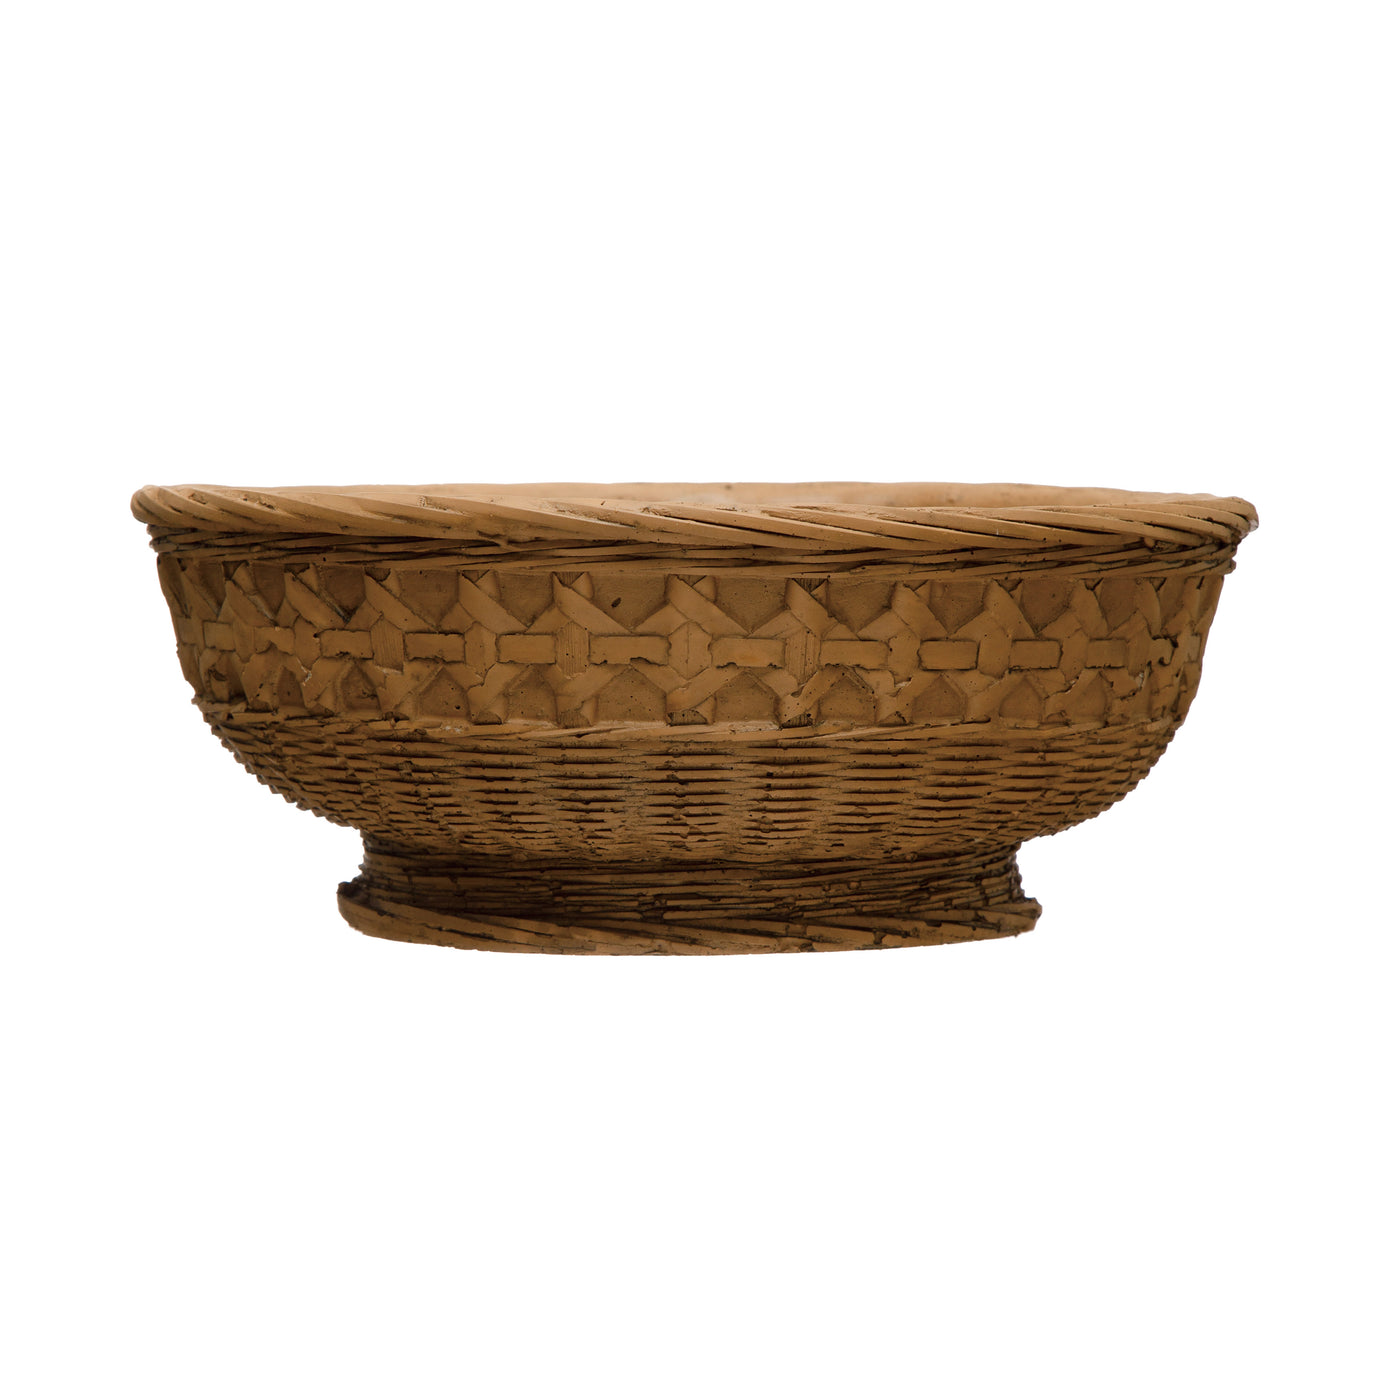 Decorative Debossed Cement Bowl/Planter with Woven Design